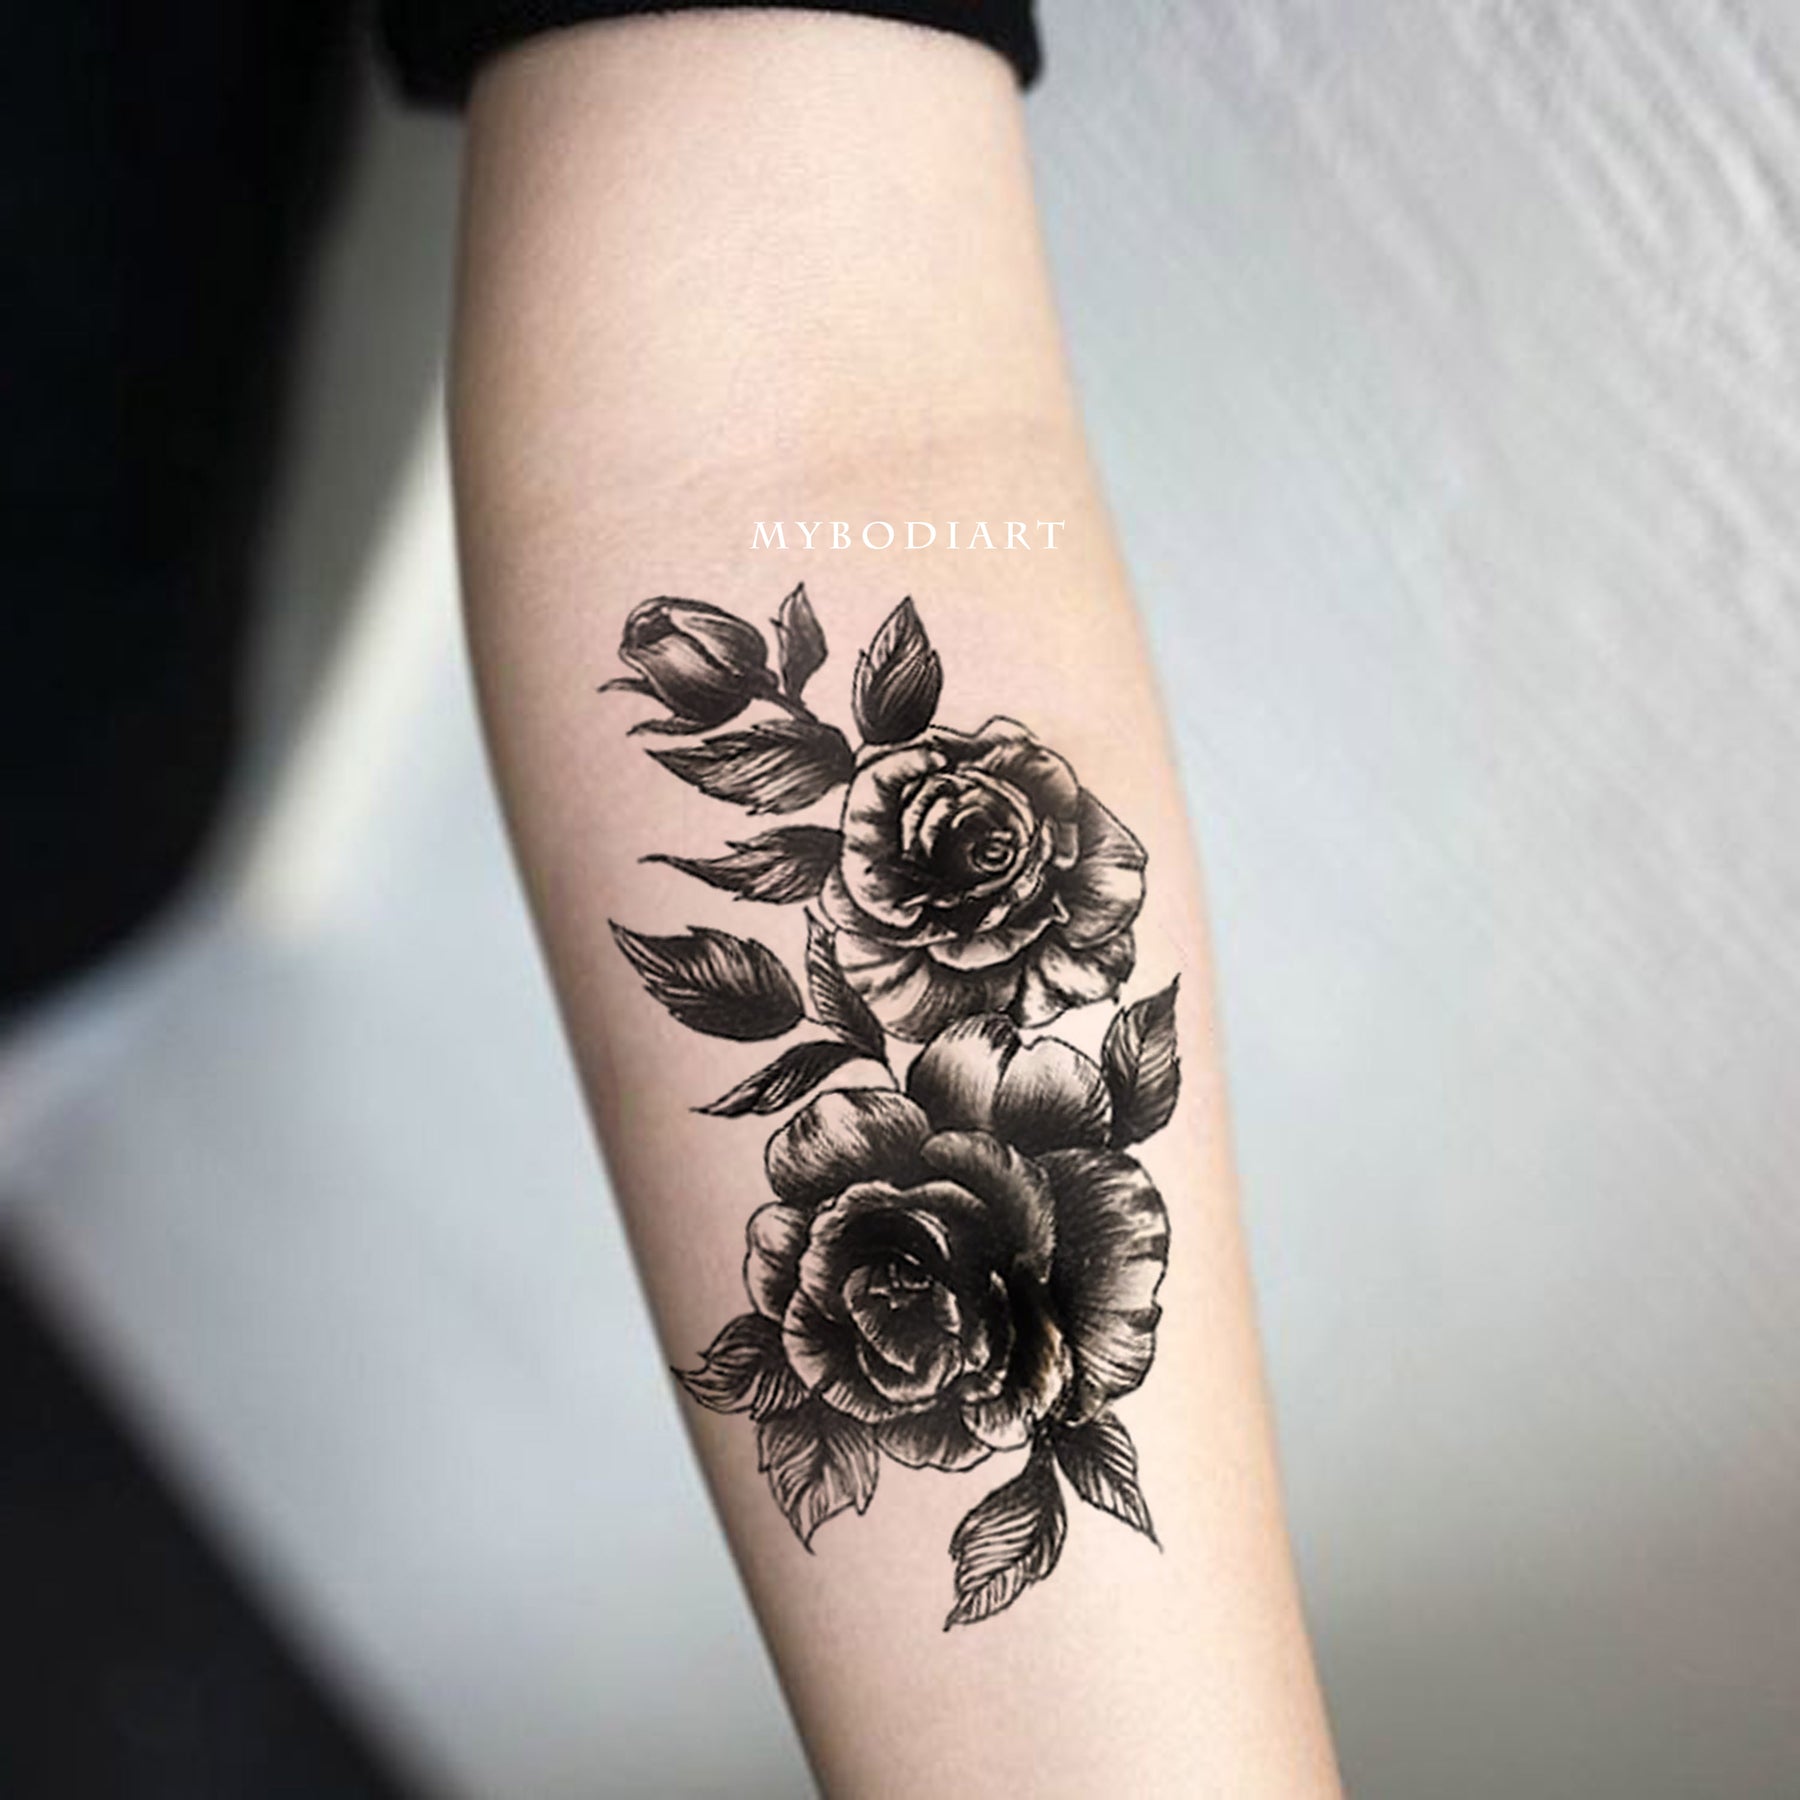 A simple #traditional #black #rose #tattoo #traditionaltat… | Flickr